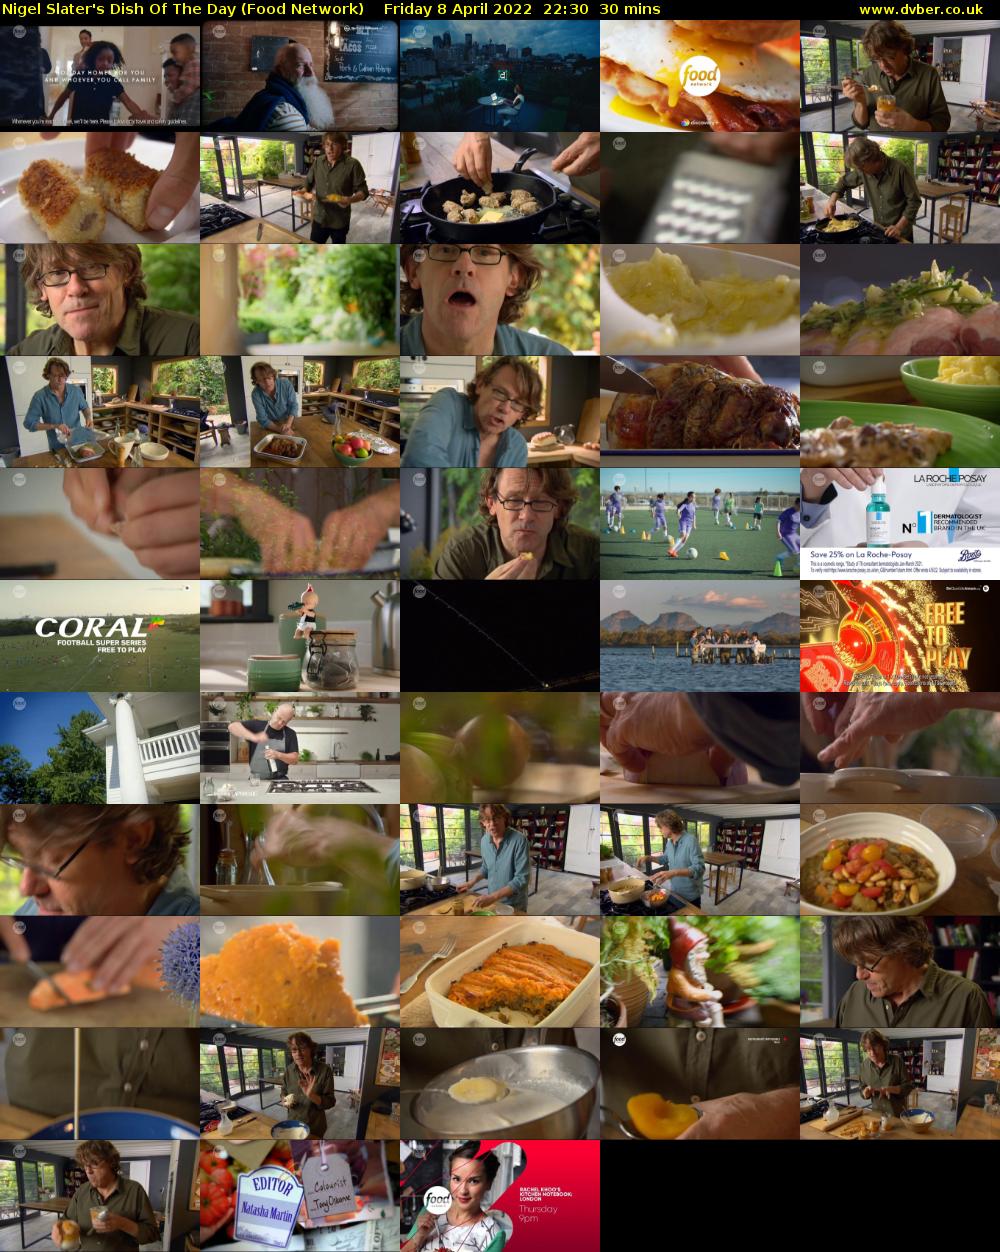 Nigel Slater's Dish Of The Day (Food Network) Friday 8 April 2022 22:30 - 23:00